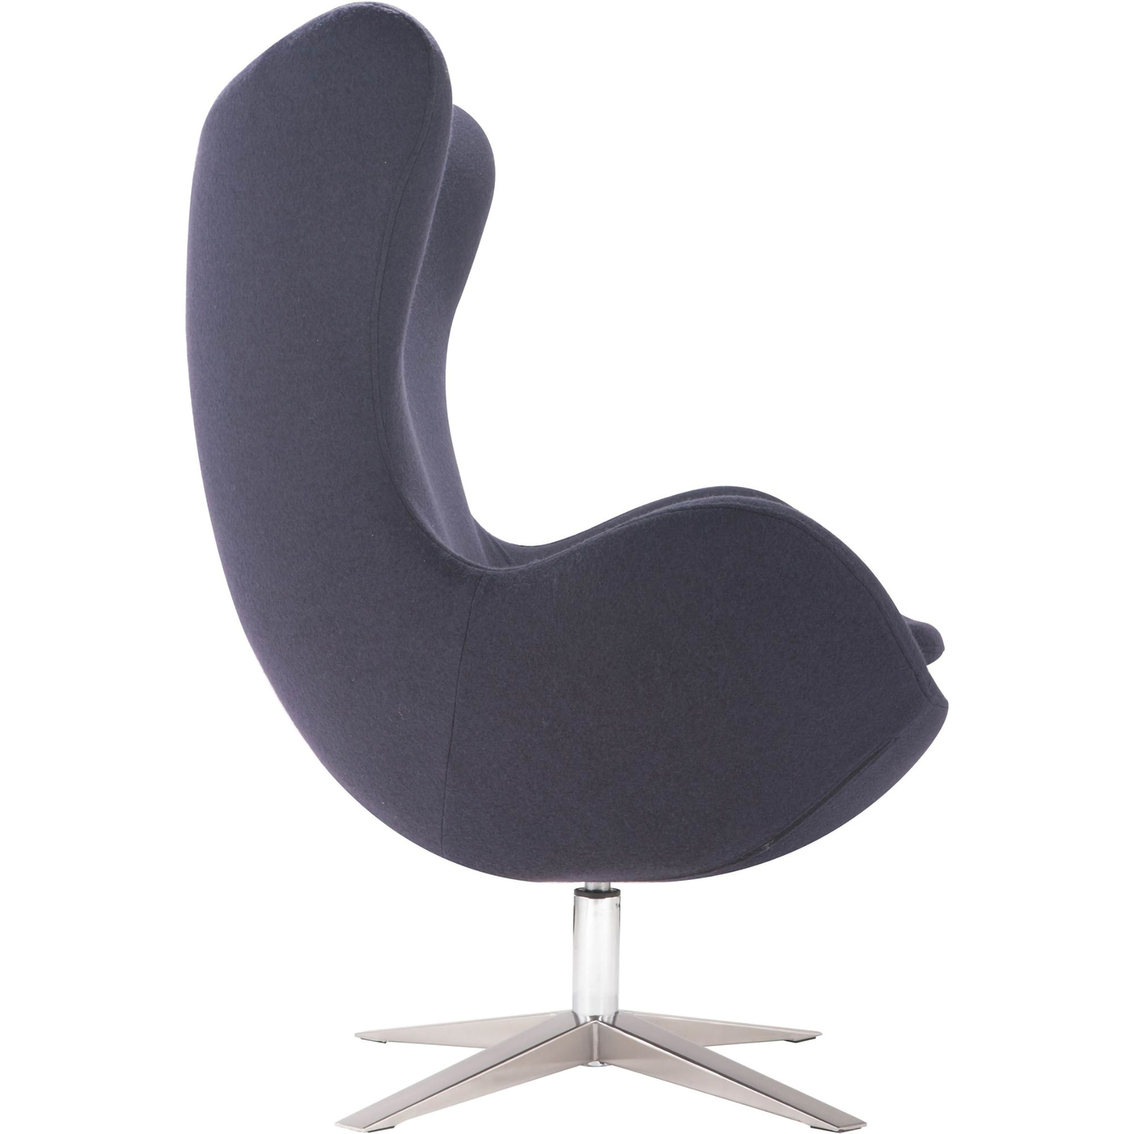 Zuo Skien Arm Chair - Image 2 of 4